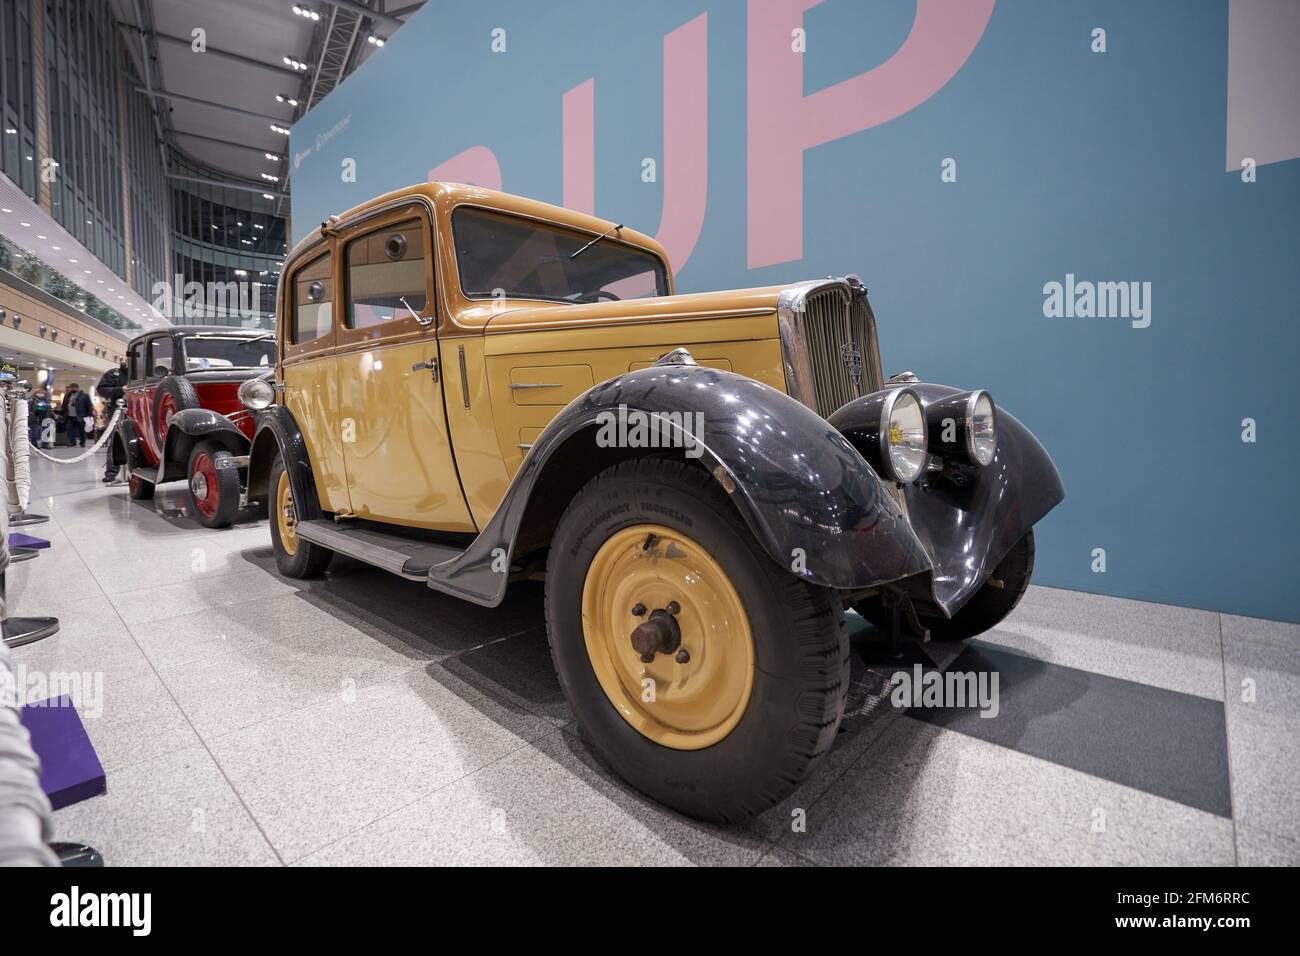 MOSCOW, RUSSIA - MAY 3, 2021: peugeot 201 br at an exhibition of retro cars at Domodeovo international airport Stock Photo